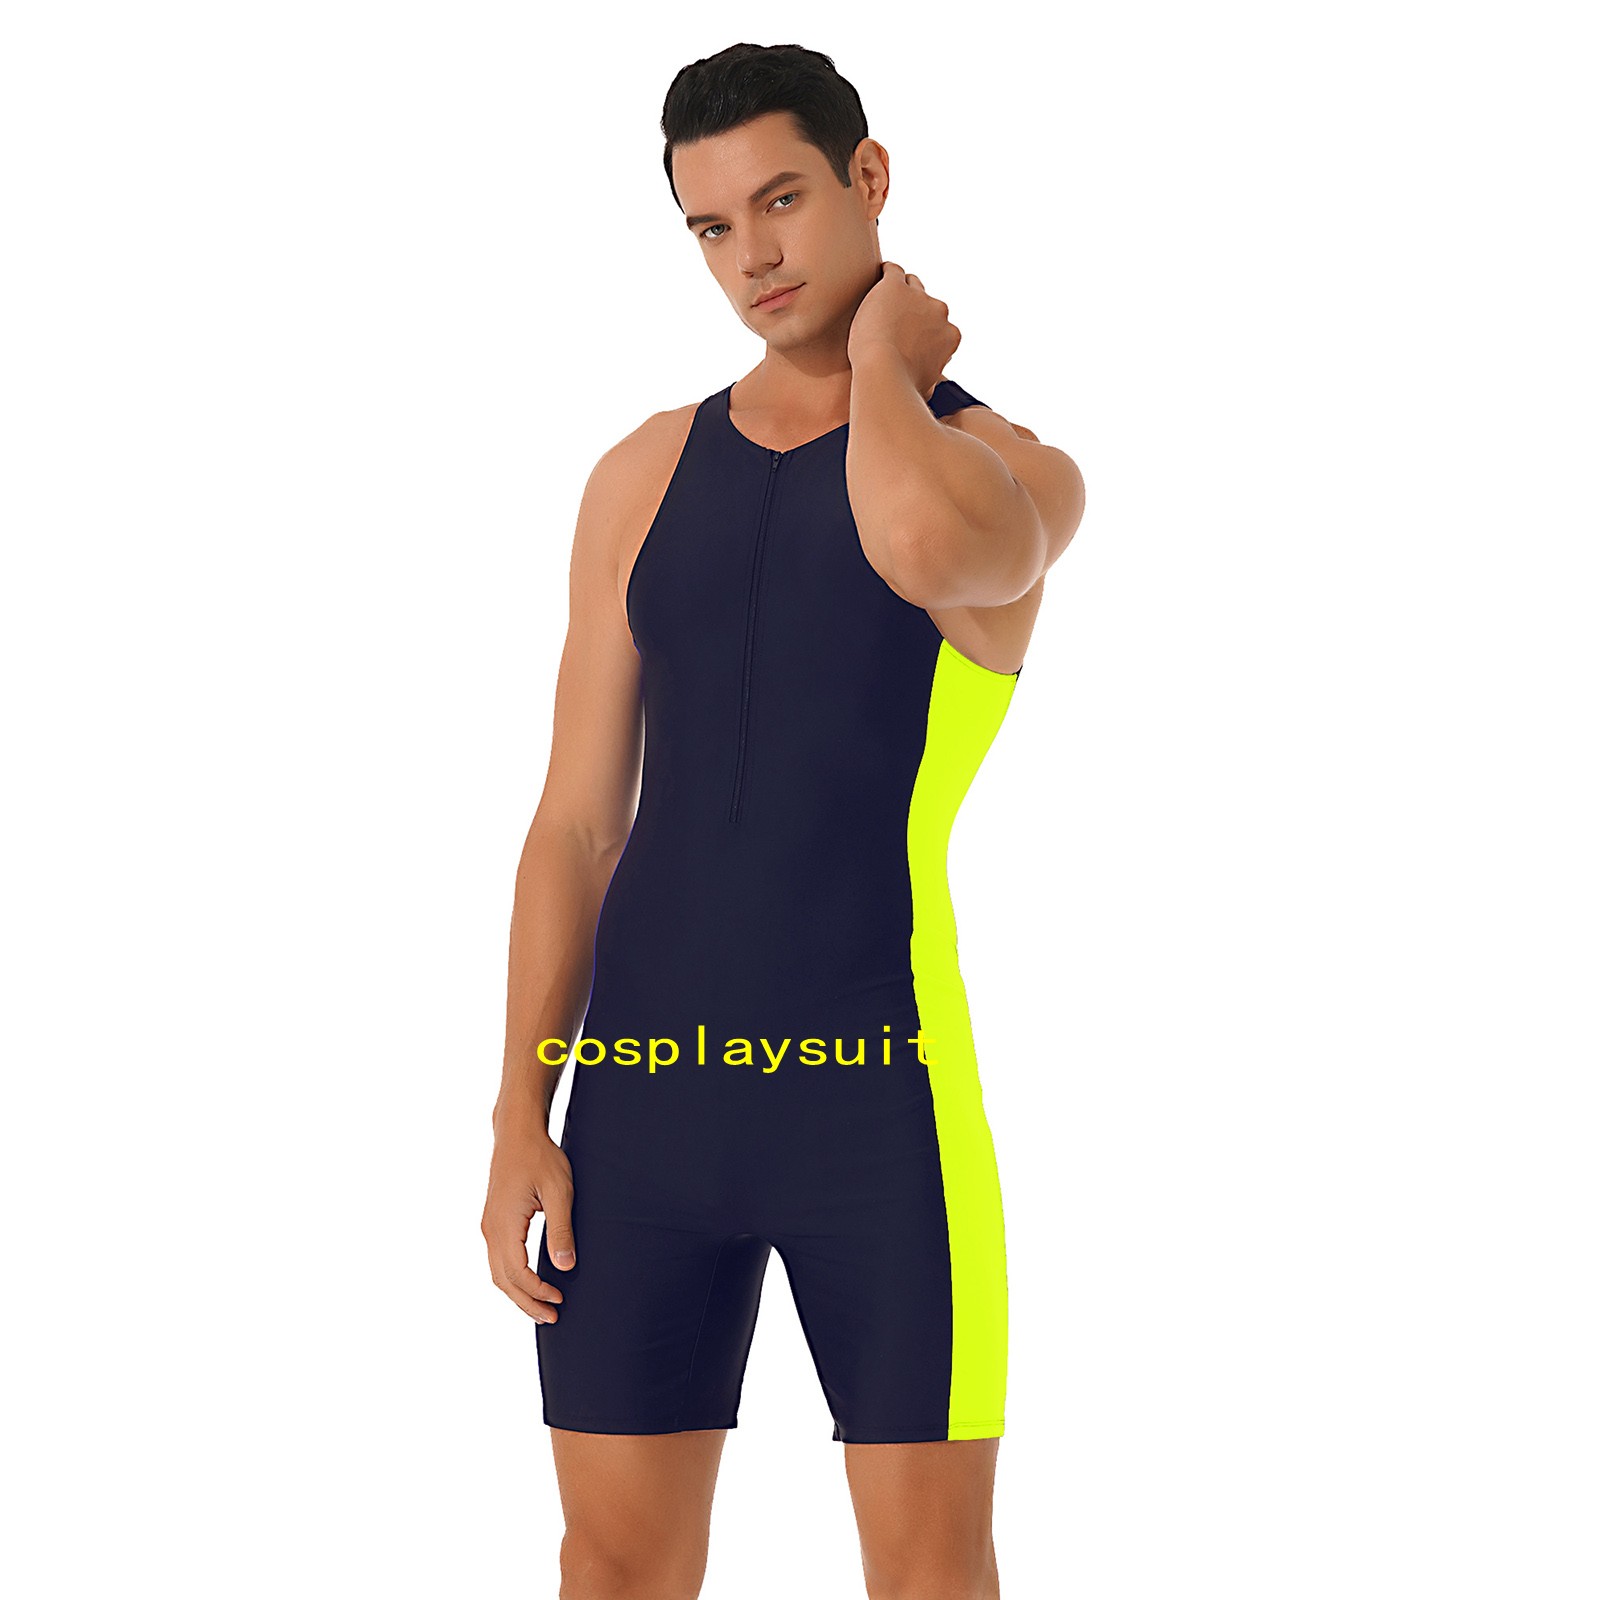 

Unisex Swimsuit Catsuit Costumes yellow stripe Lycar Spandex Training Competition Wrestling Weight Lifting Suit Men's spotrs bodysuit front zipper, Light pink & yellow stripe